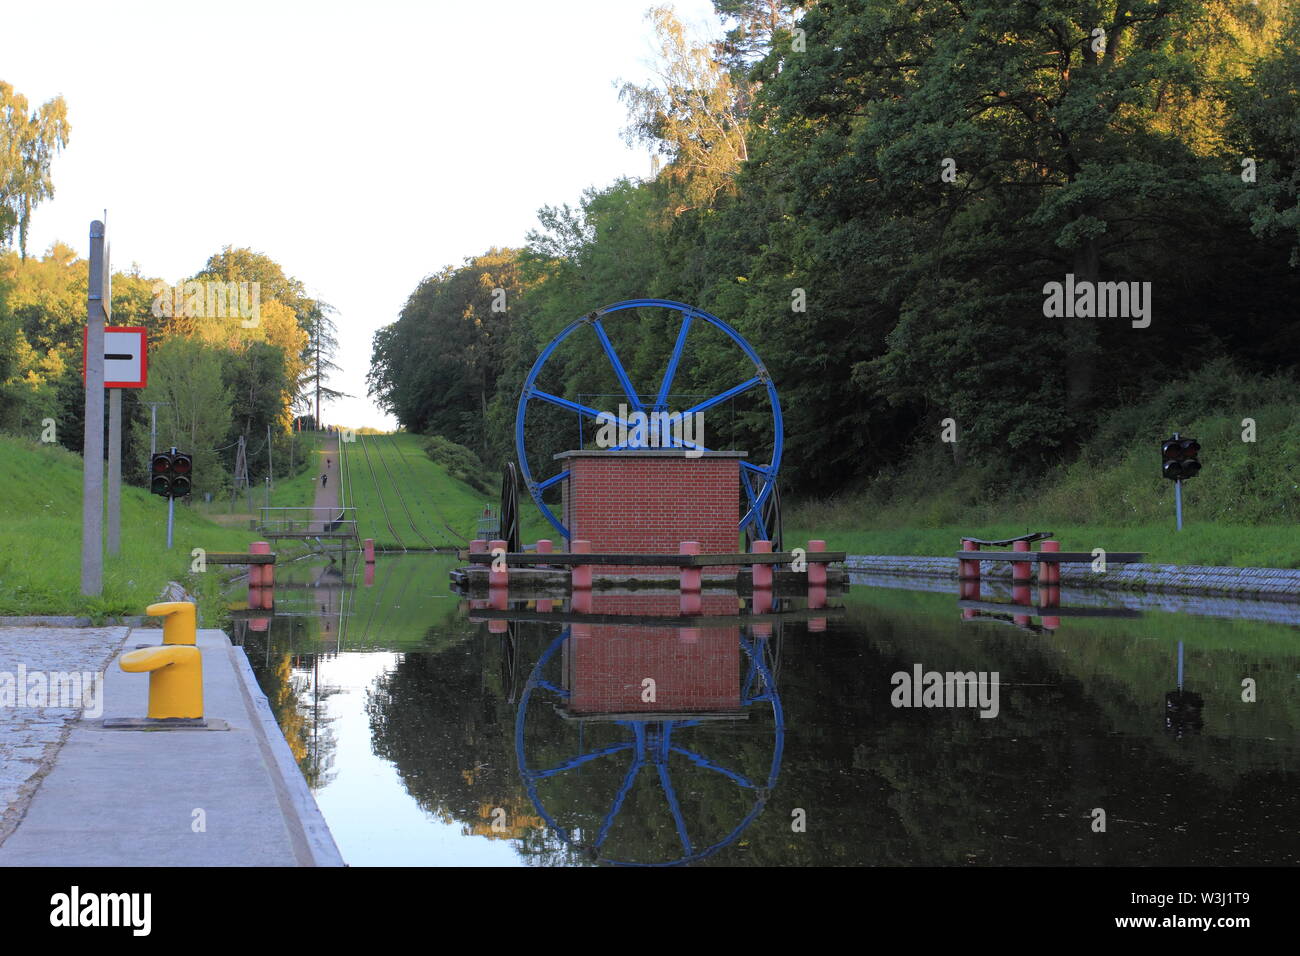 The Inclined Planes and carriage in Buczyniec, Machinery for ships transporting over hills, Unesco memorial to world culture. Poland, Elblag Canal, Po Stock Photo